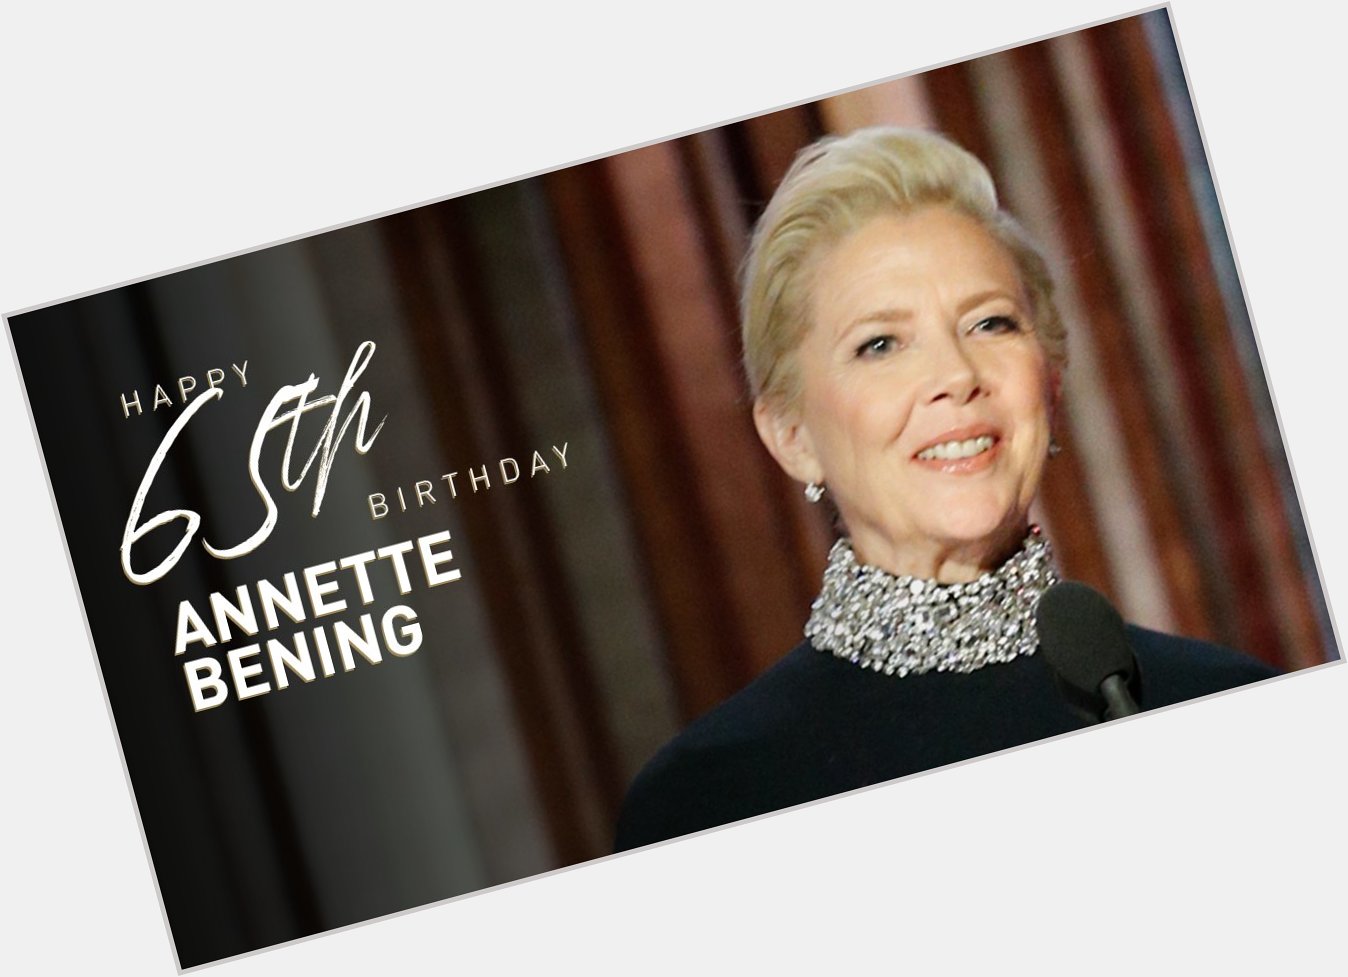 Happy 65th birthday Annette Bening!

Read her tribute here:  